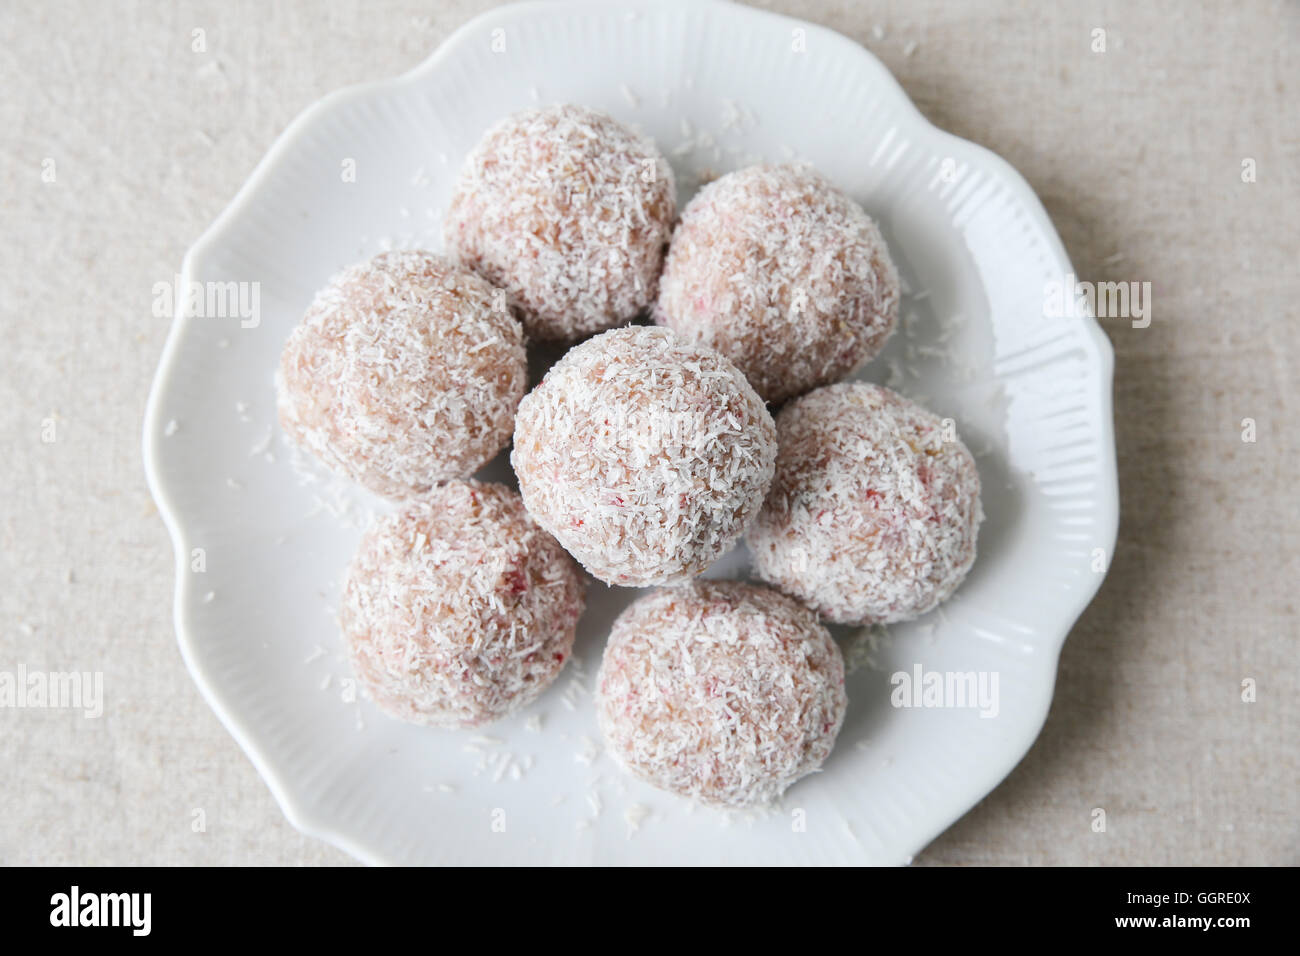 Homemade strawberry, date, cashew and coconut bliss ball on vintage plate Stock Photo